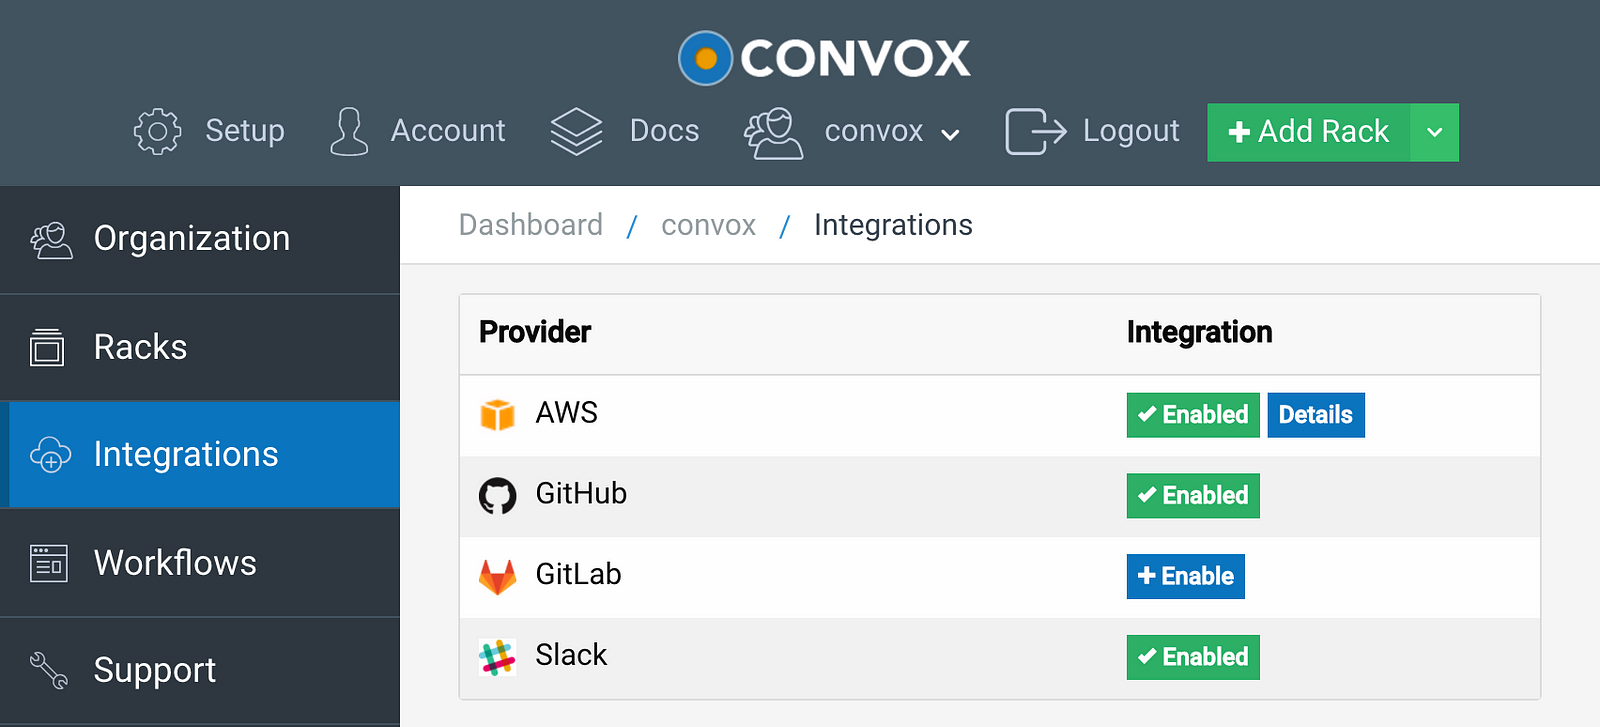 Convox integrates AWS with your team collaboration services